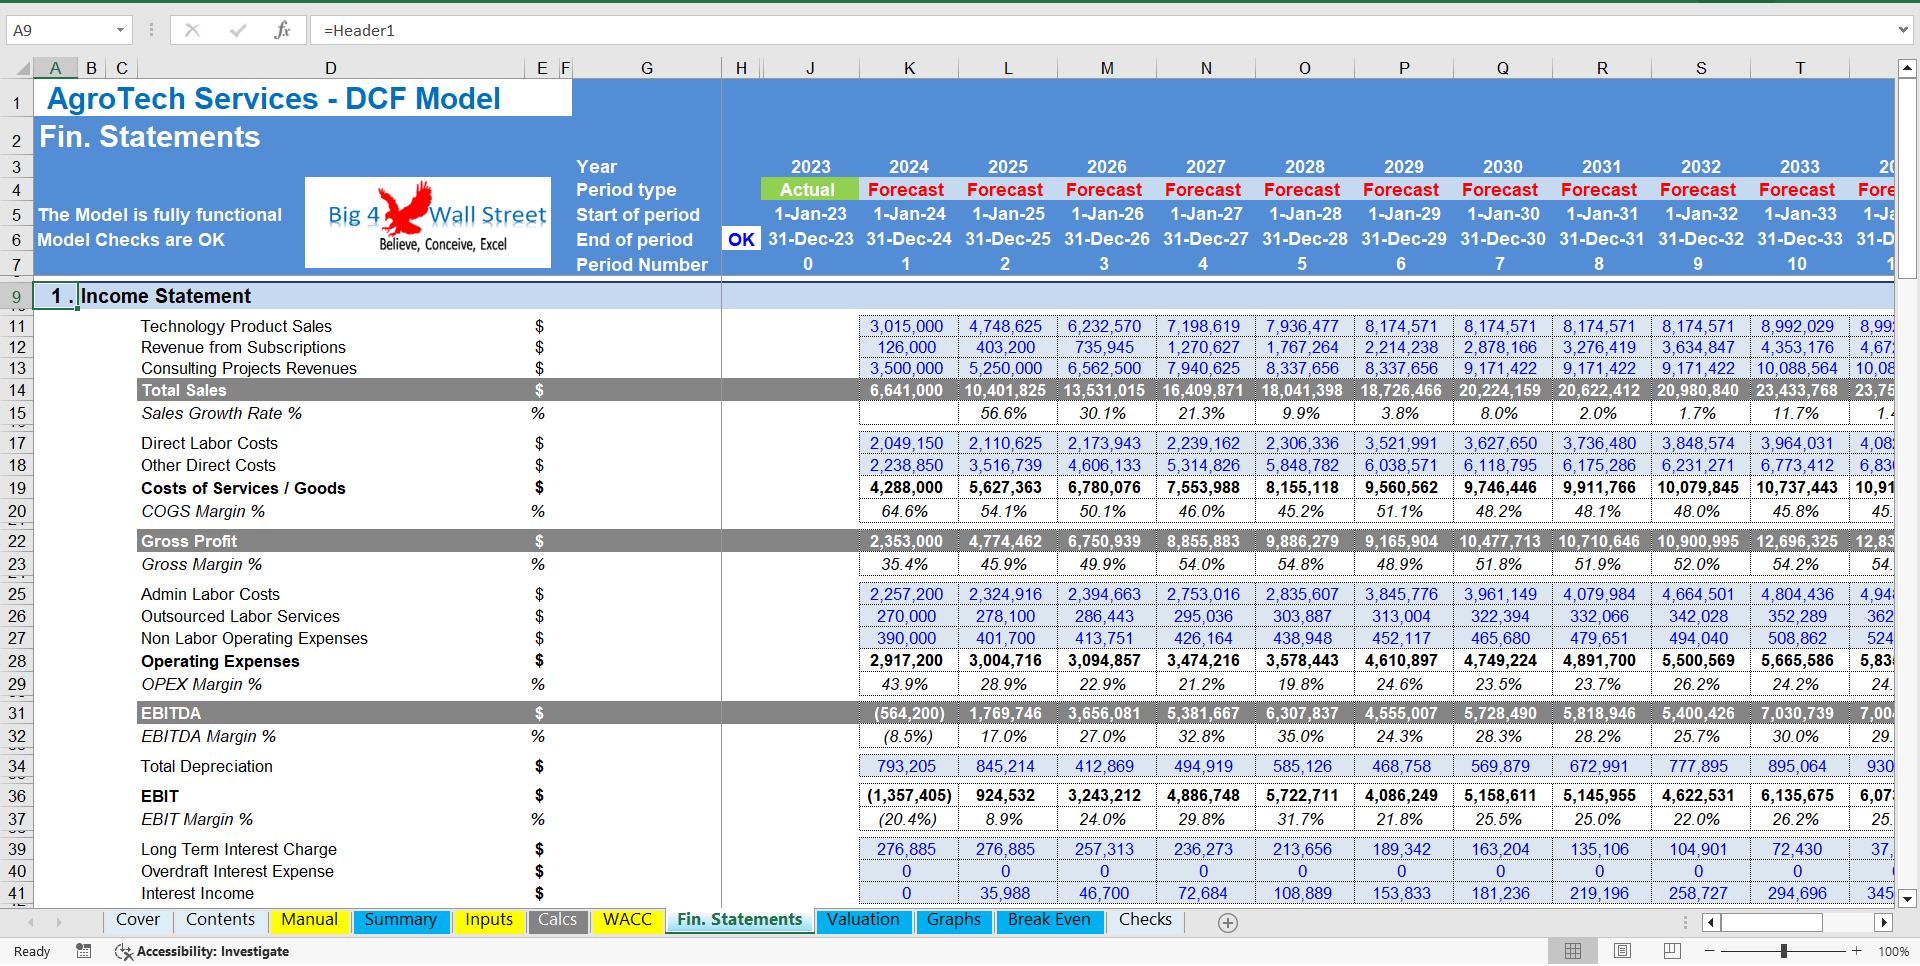 AgroTech Services Financial Model (10-Year DCF and Valuation) (Excel template (XLSX)) Preview Image